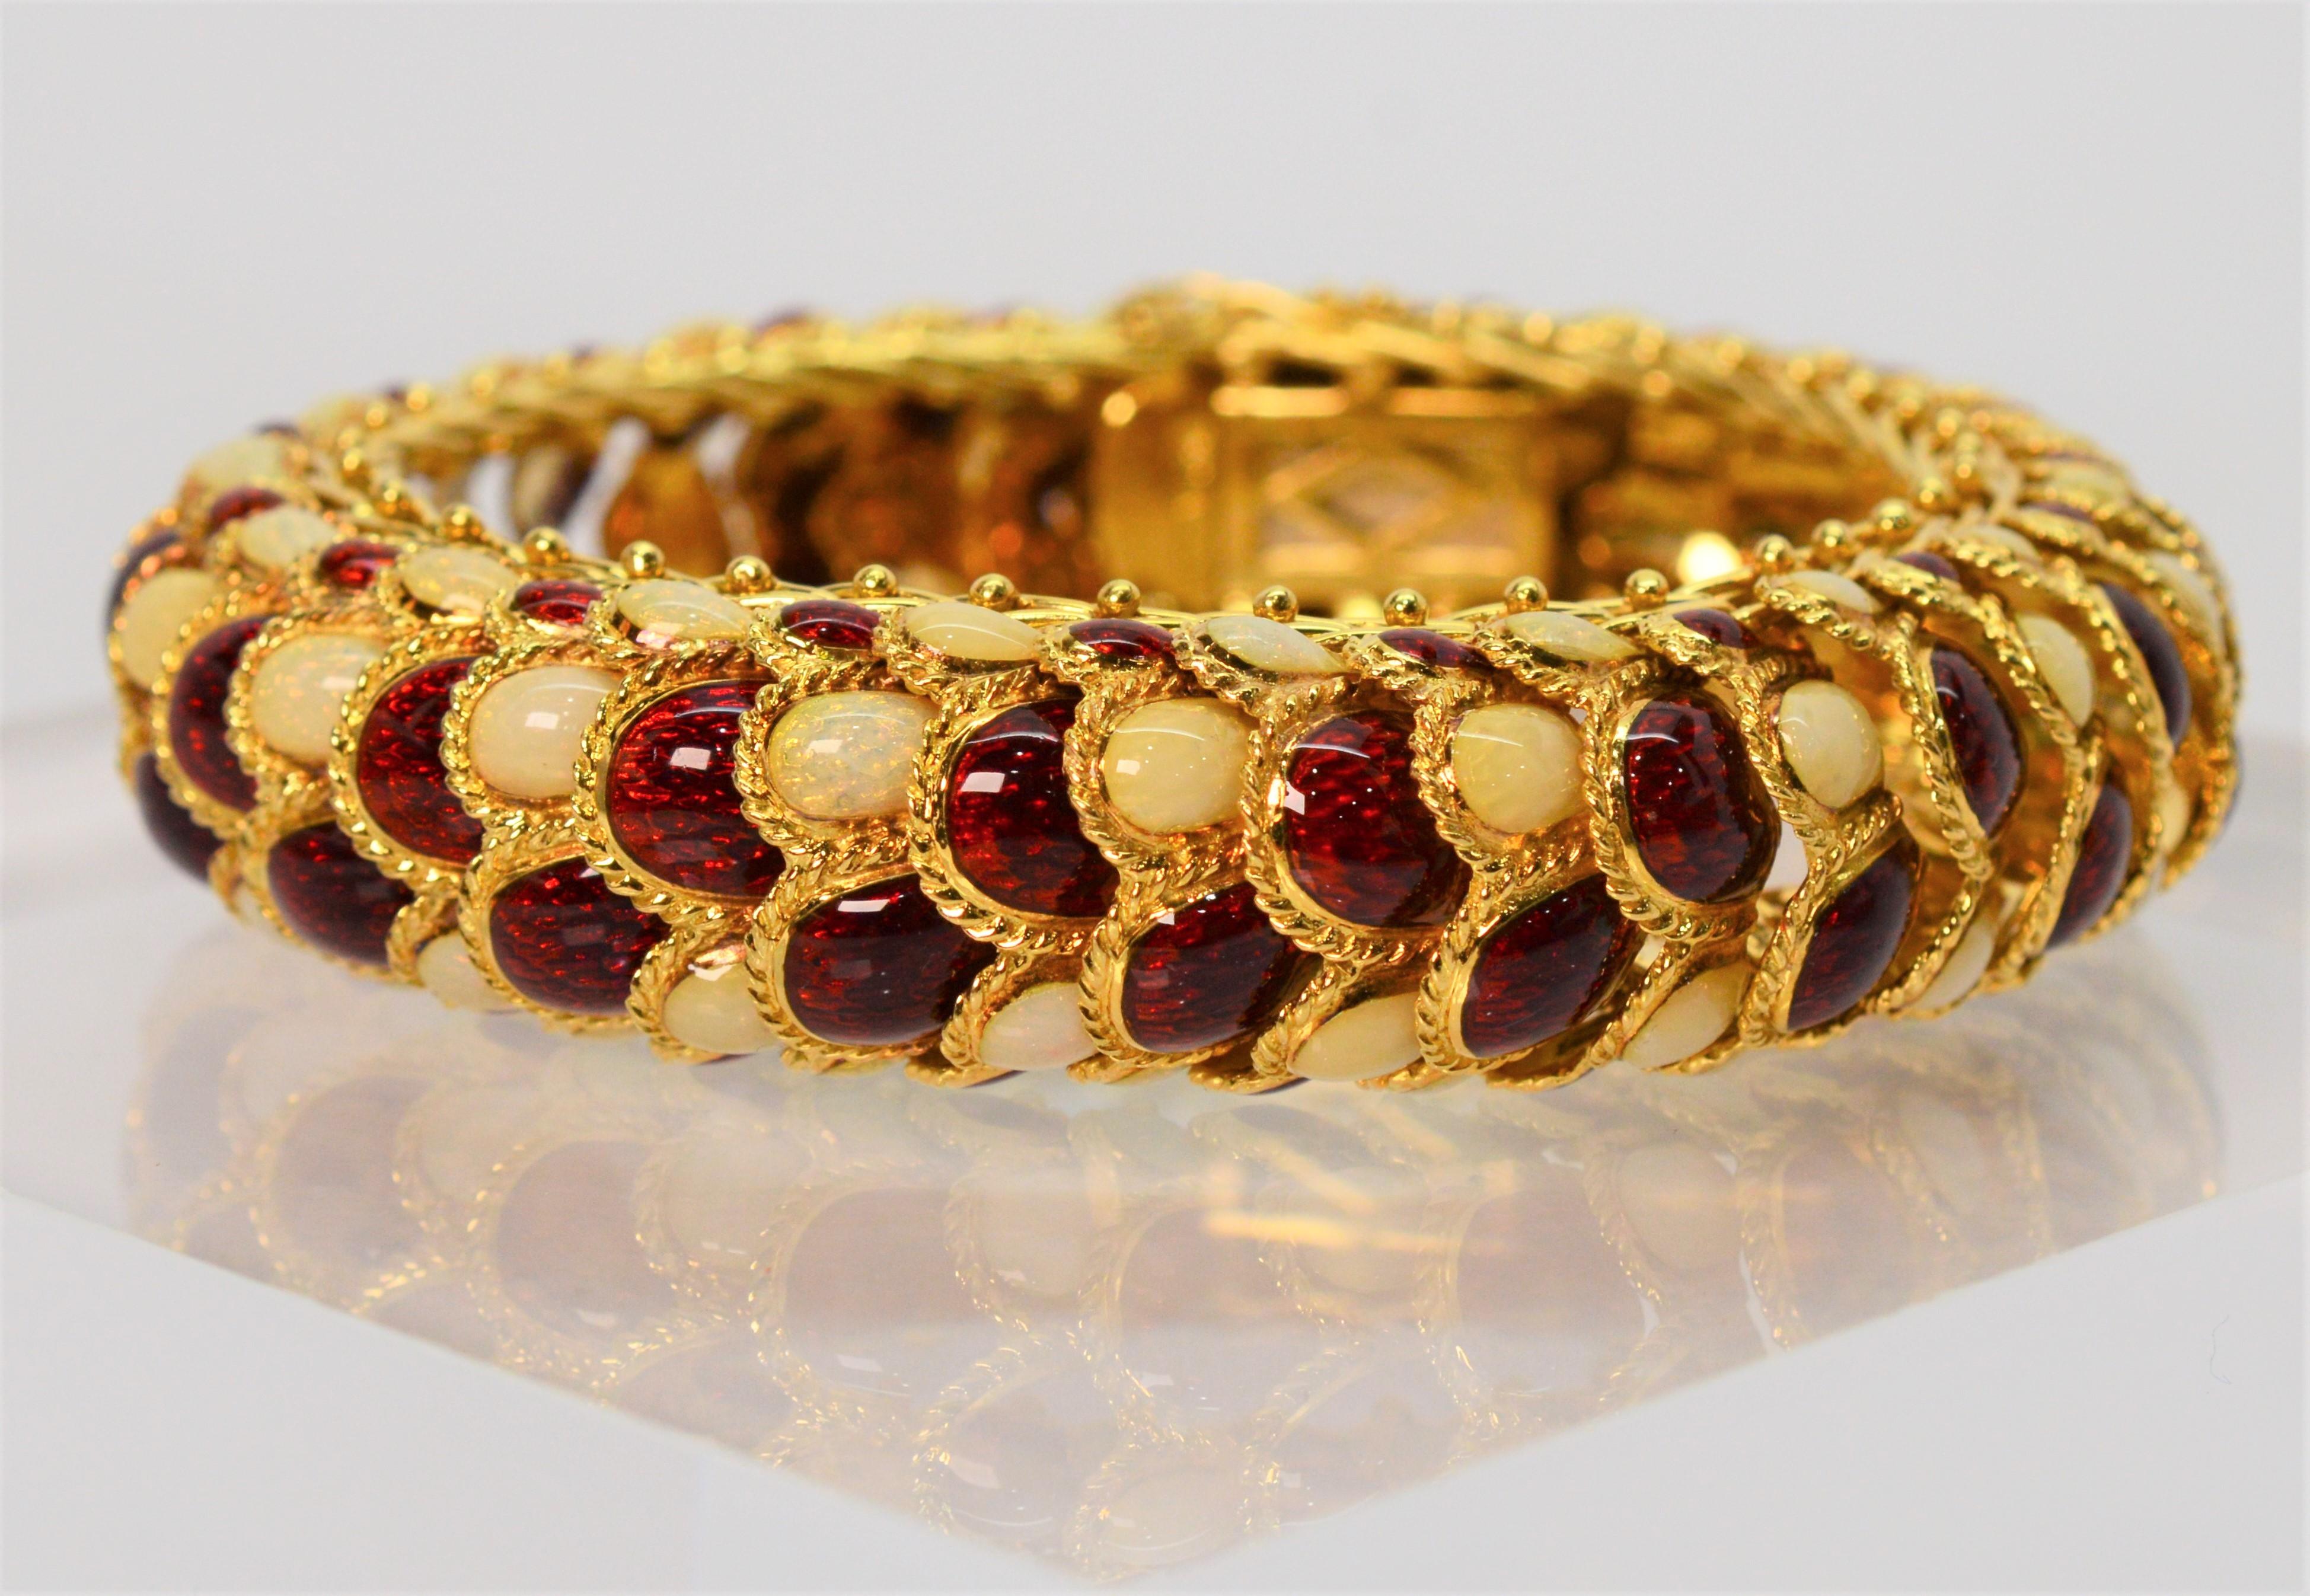 Superb statement piece exhibiting masterful Italian craftmanship. Truly eye catching with stunning garnet and opal colored hand painted glass enamel links that are individually framed, each with a twist of bright yellow gold to form the reptilian